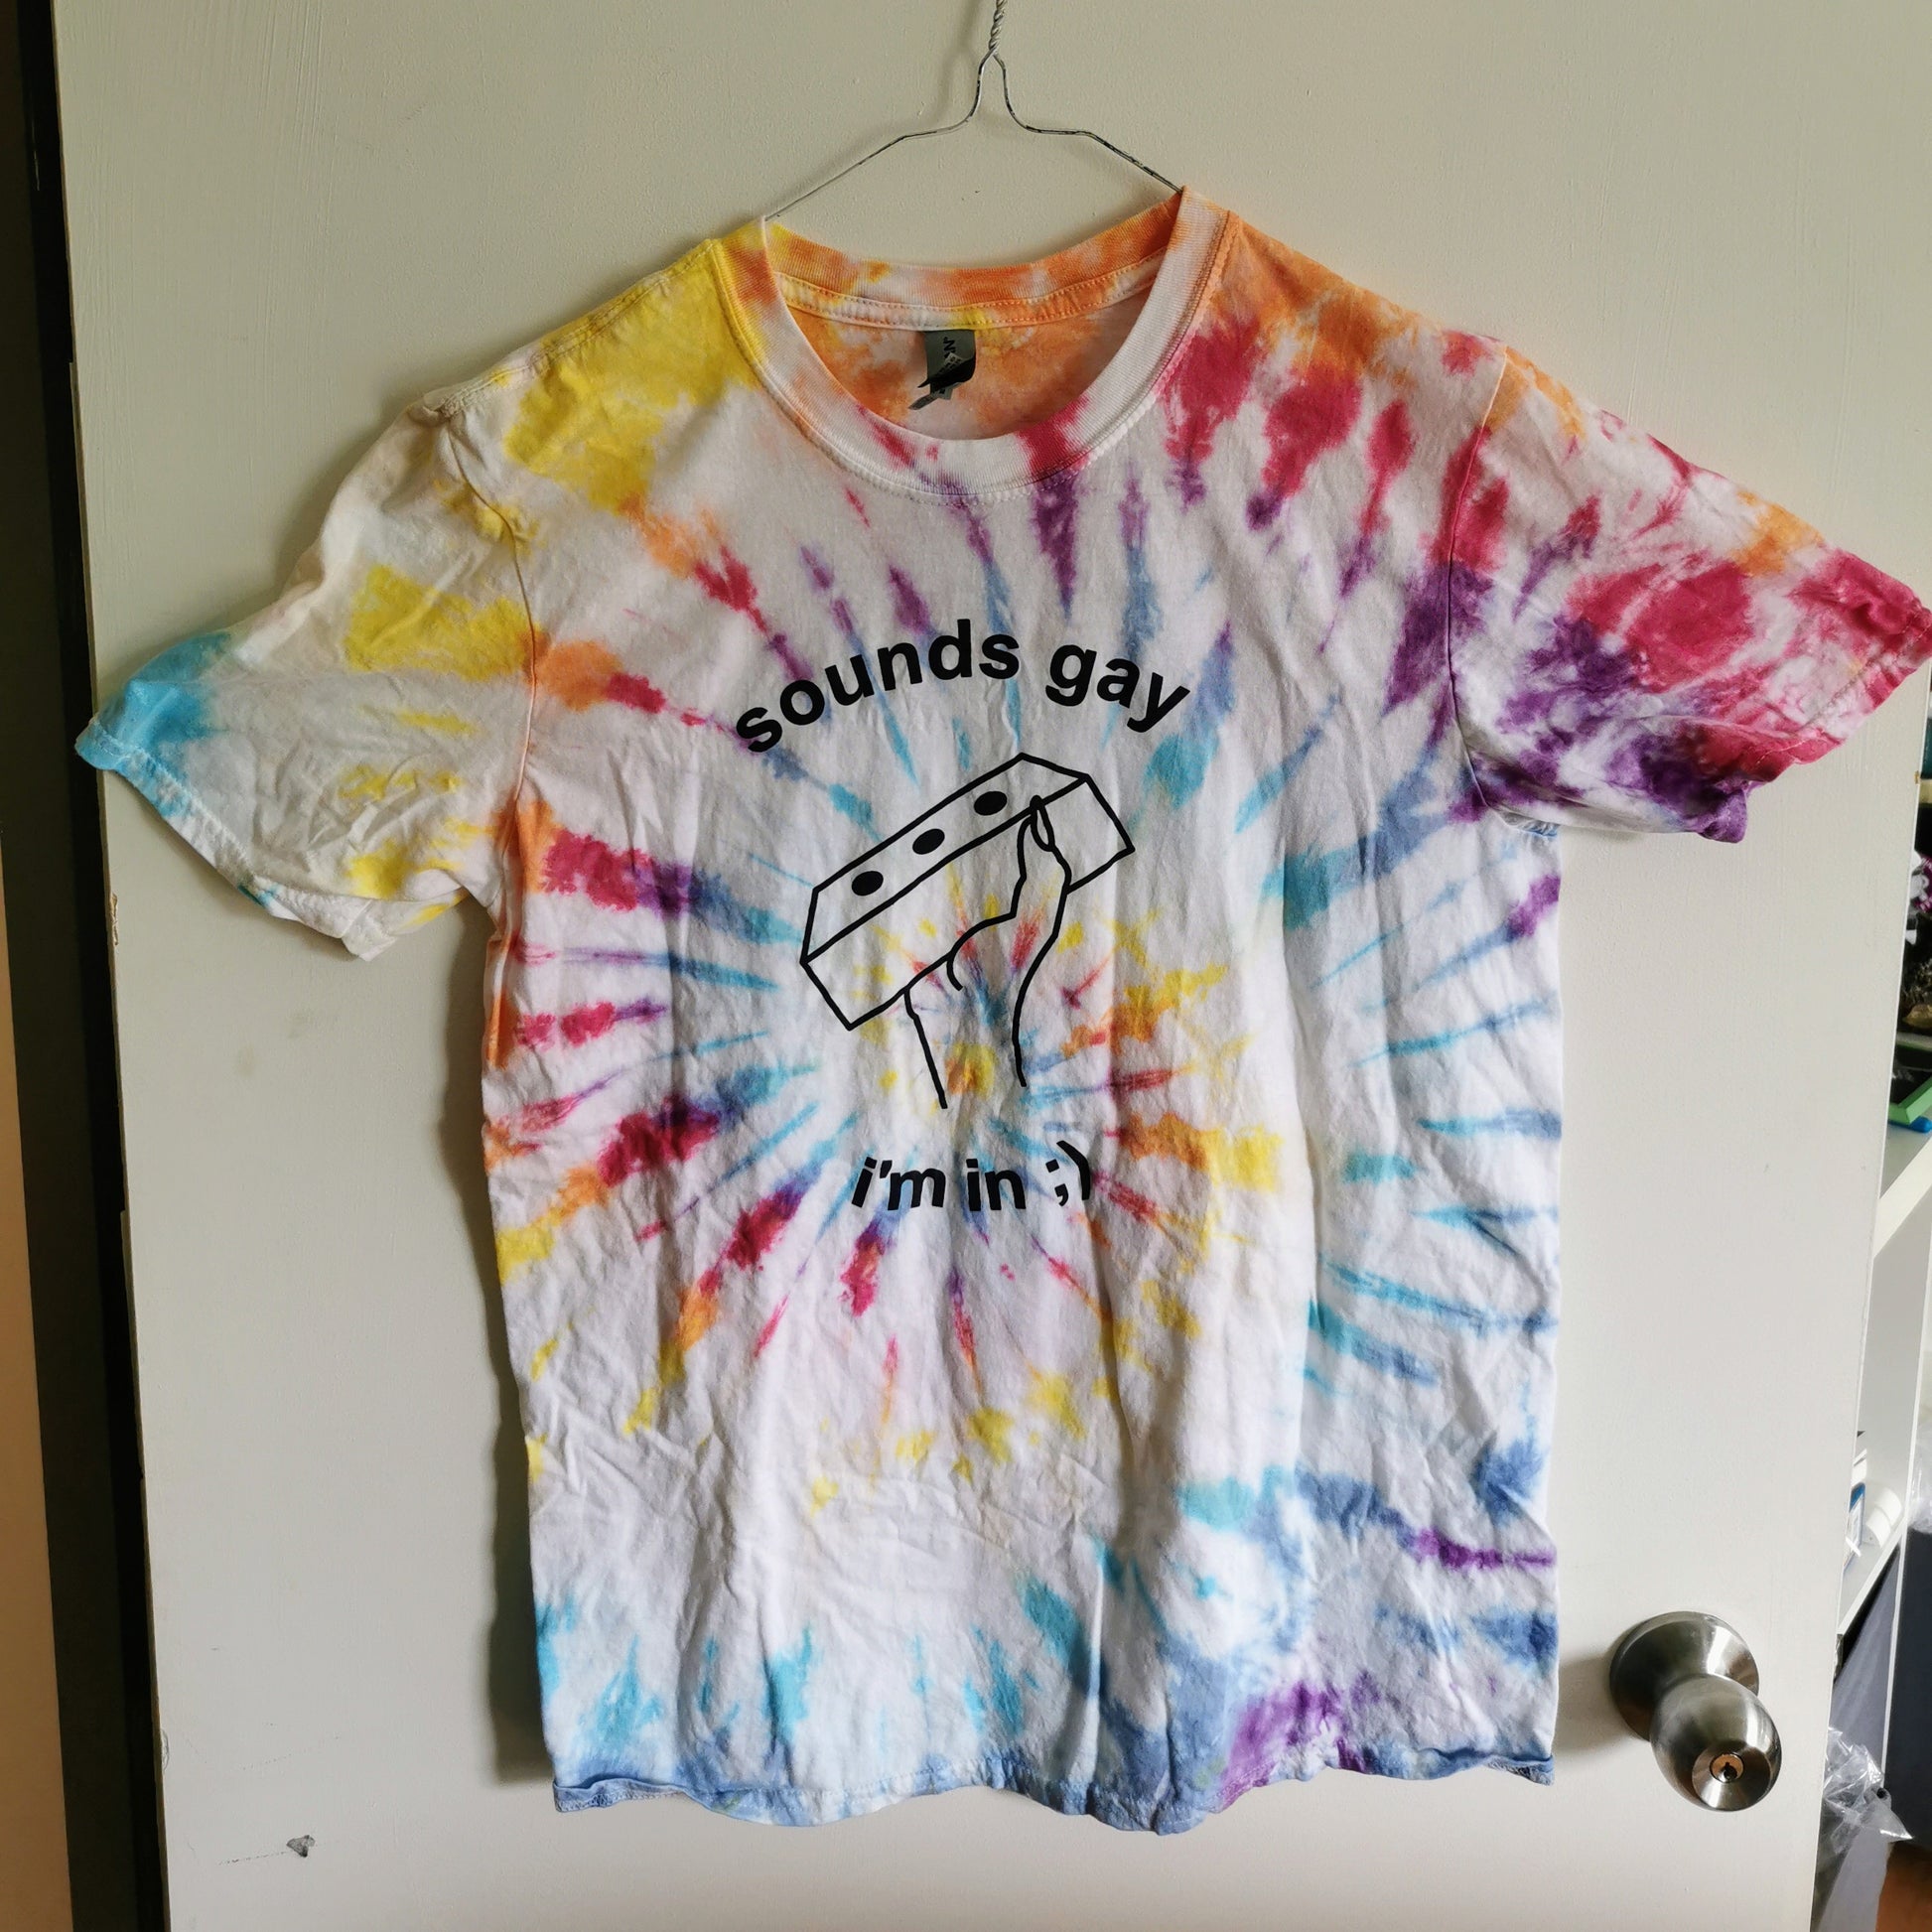 rainbow swirl tie-dye t-shirt with text reading "sounds gay i'm in" and a line drawing of a hand holding a brick